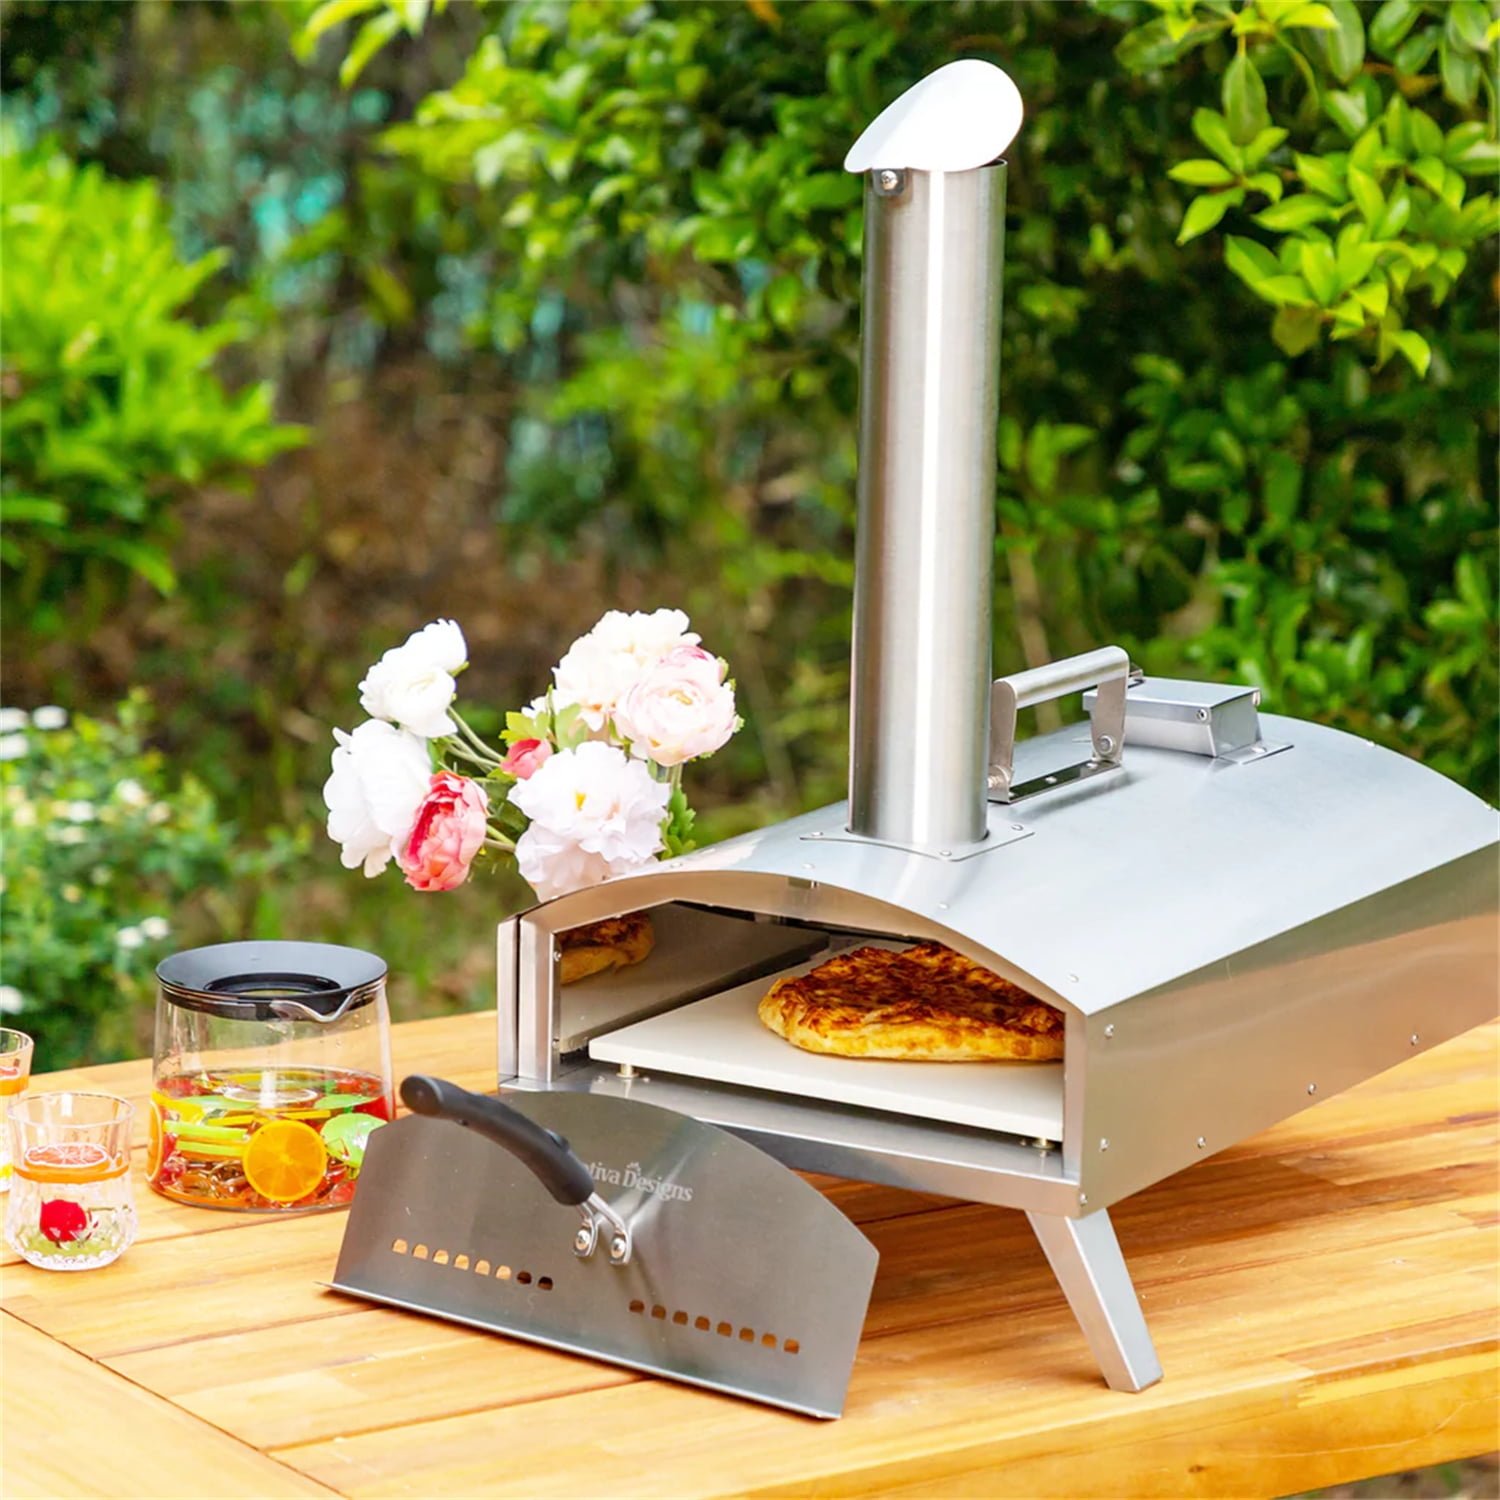 MF Studio 12 Portable Pellet Outdoor Pizza Oven with Pizza Stone